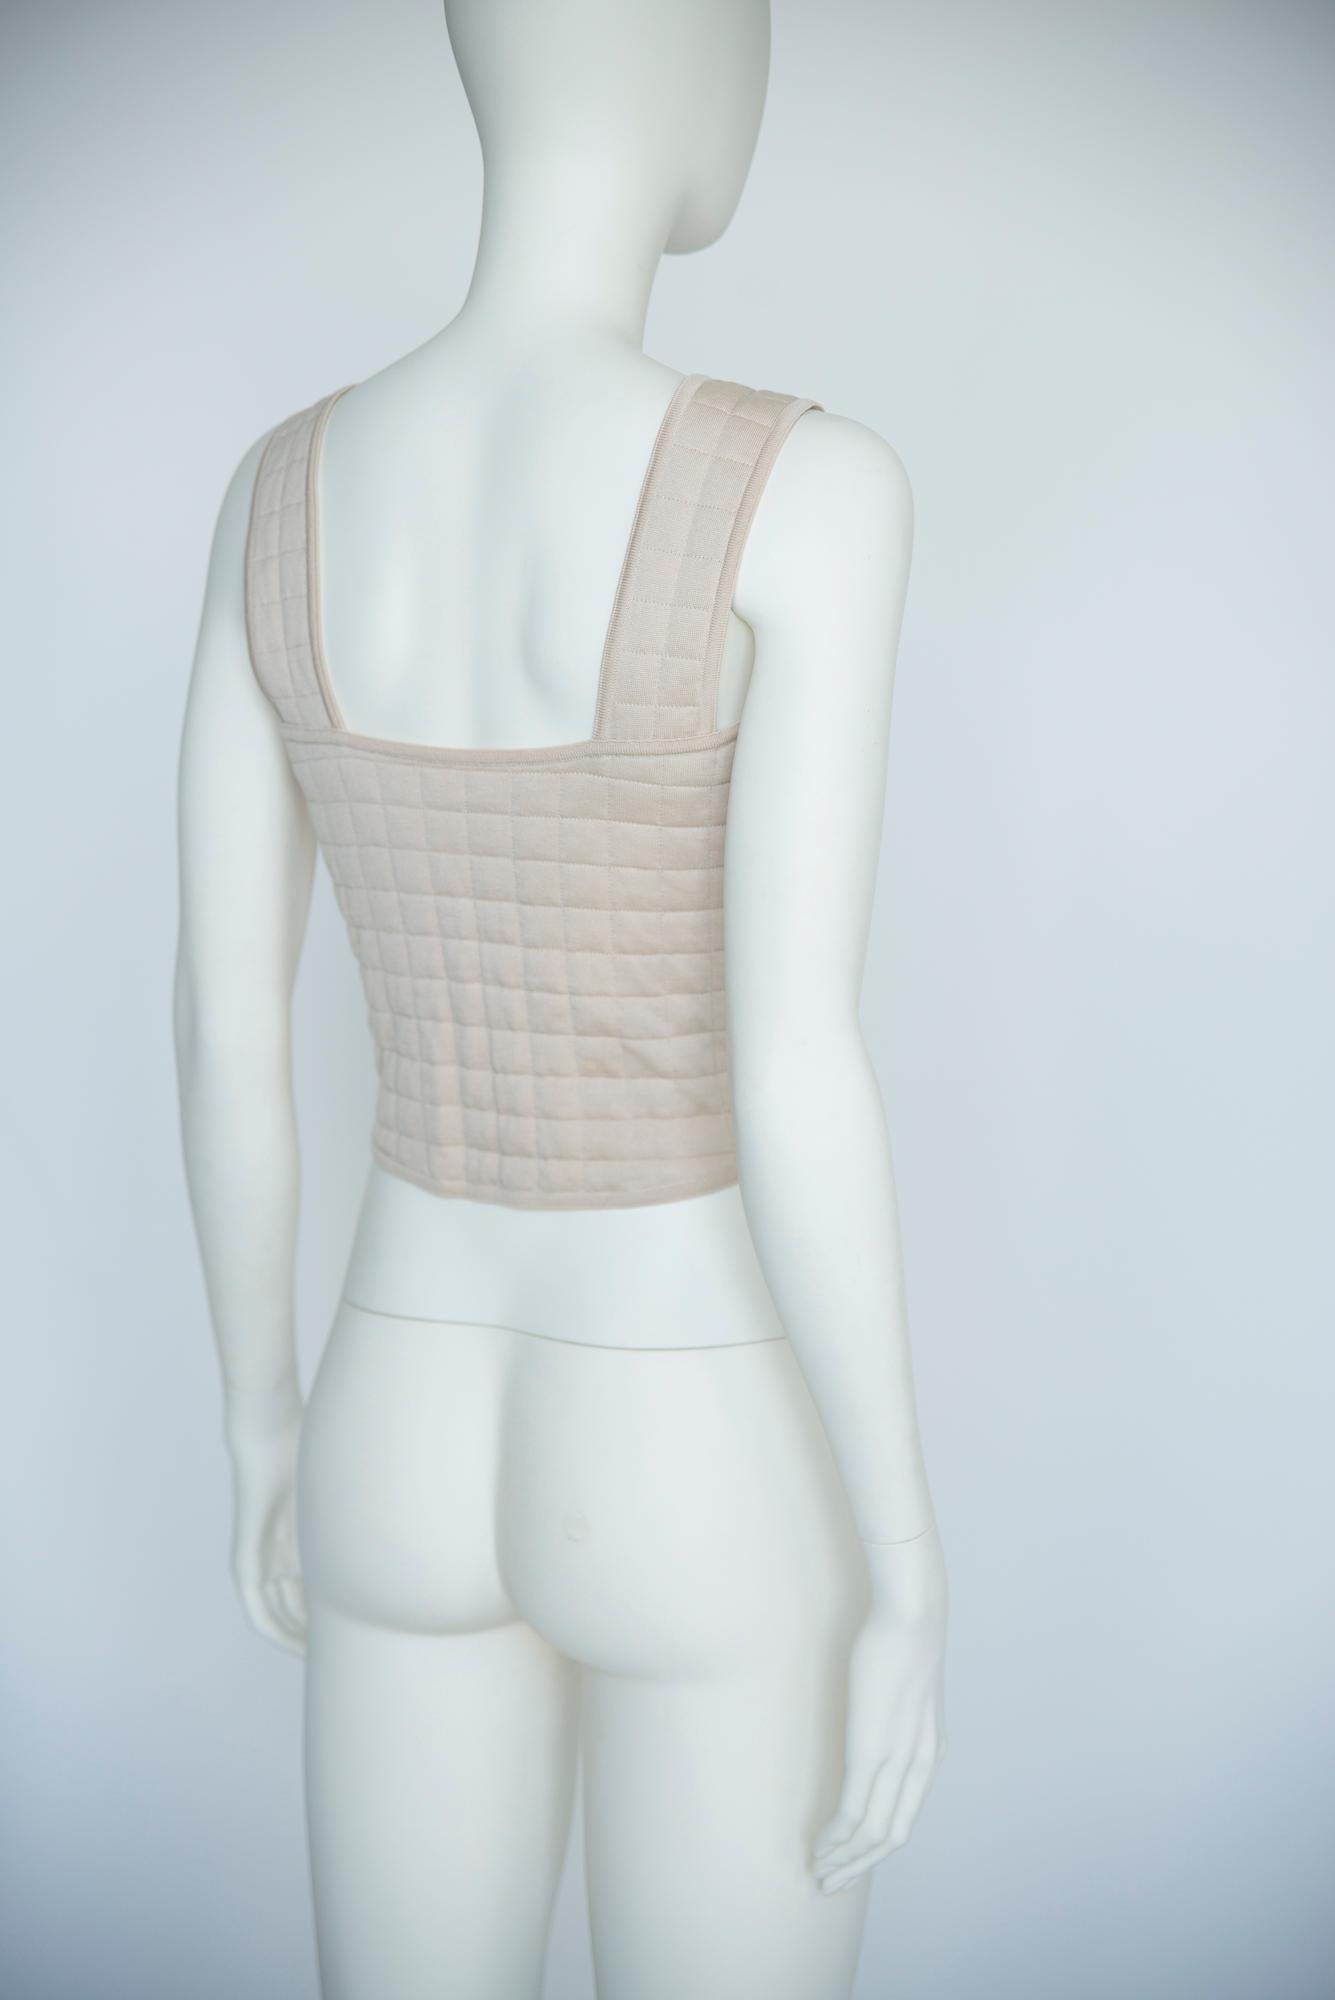 Chanel By Karl Lagerfeld Runway Padded Quilted Cotton Tank Top, SS2000 For Sale 9